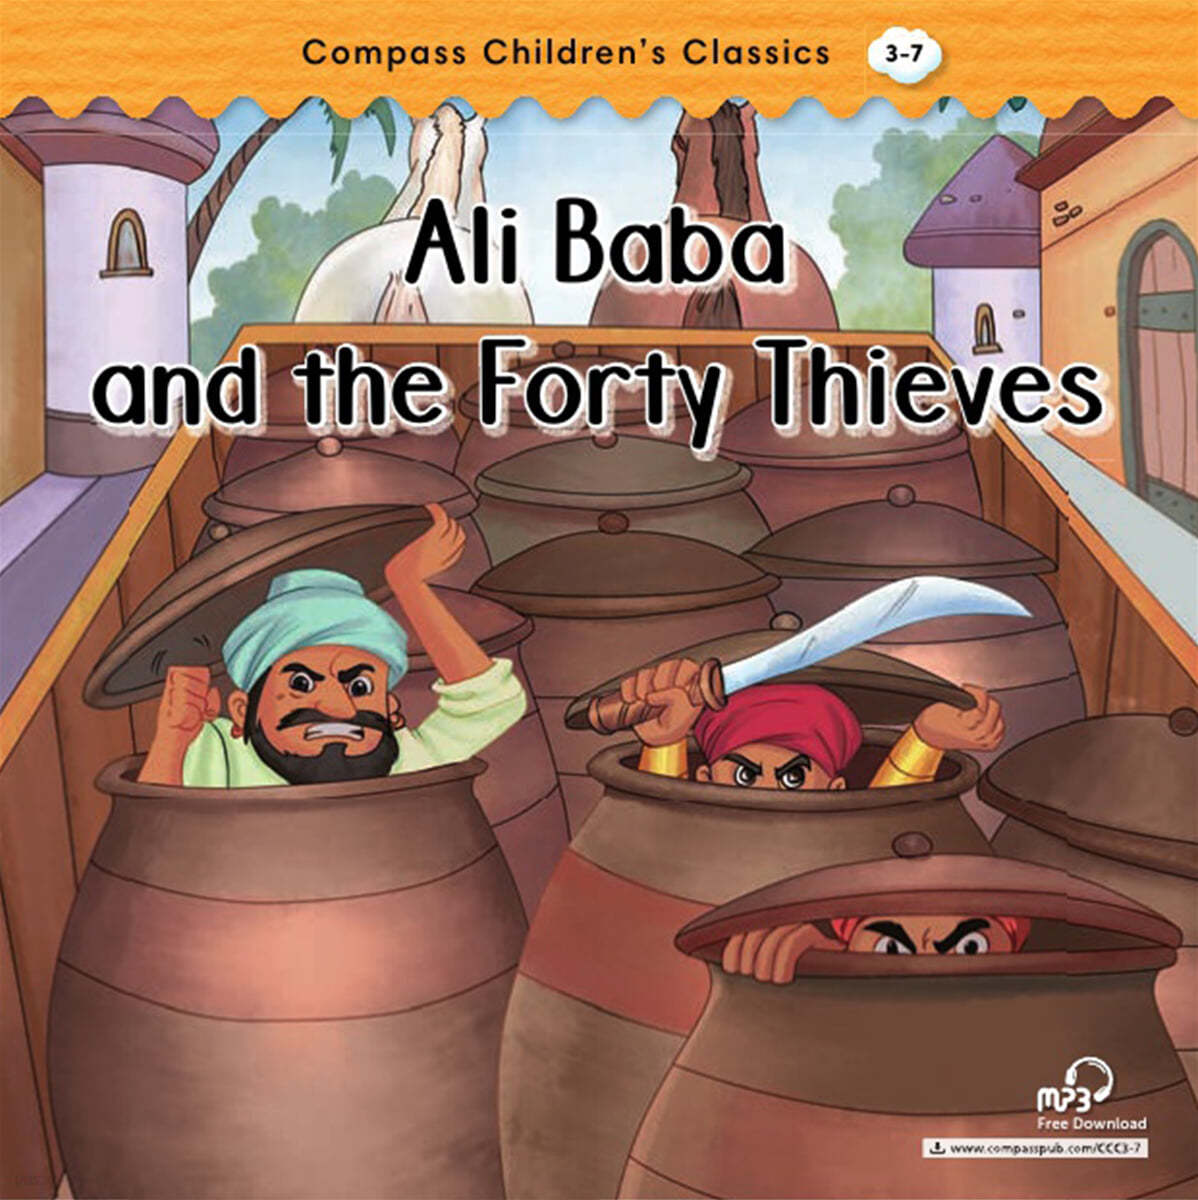 Compass Children’s Classic Readers Level 3 : Ali Baba and the Forty Thieves